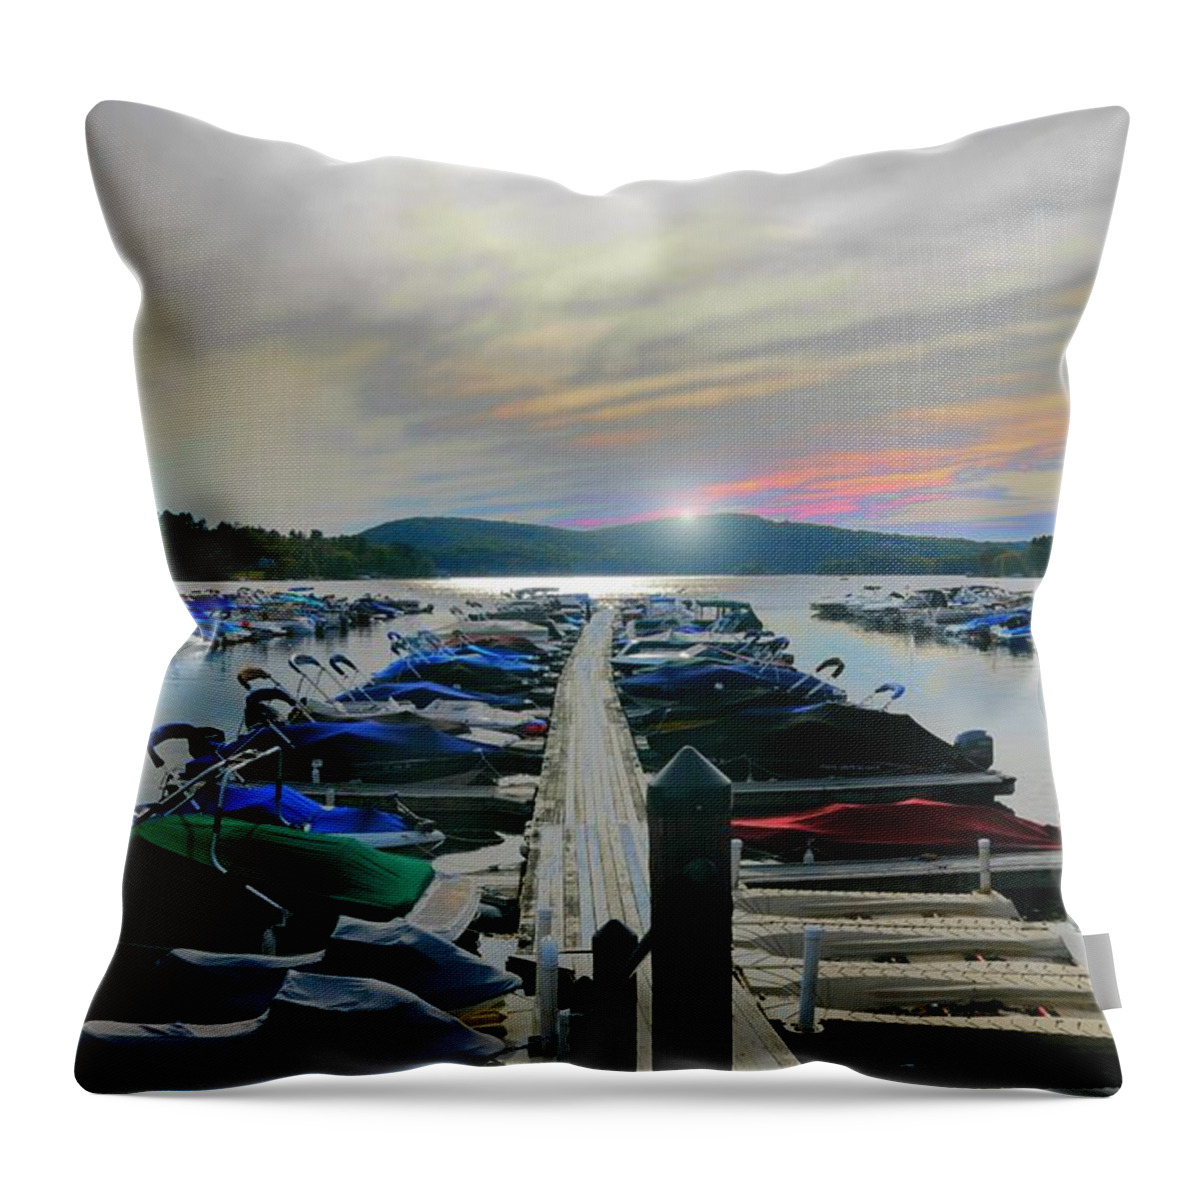 Landscape Throw Pillow featuring the photograph Candlewood Lake by Diana Angstadt